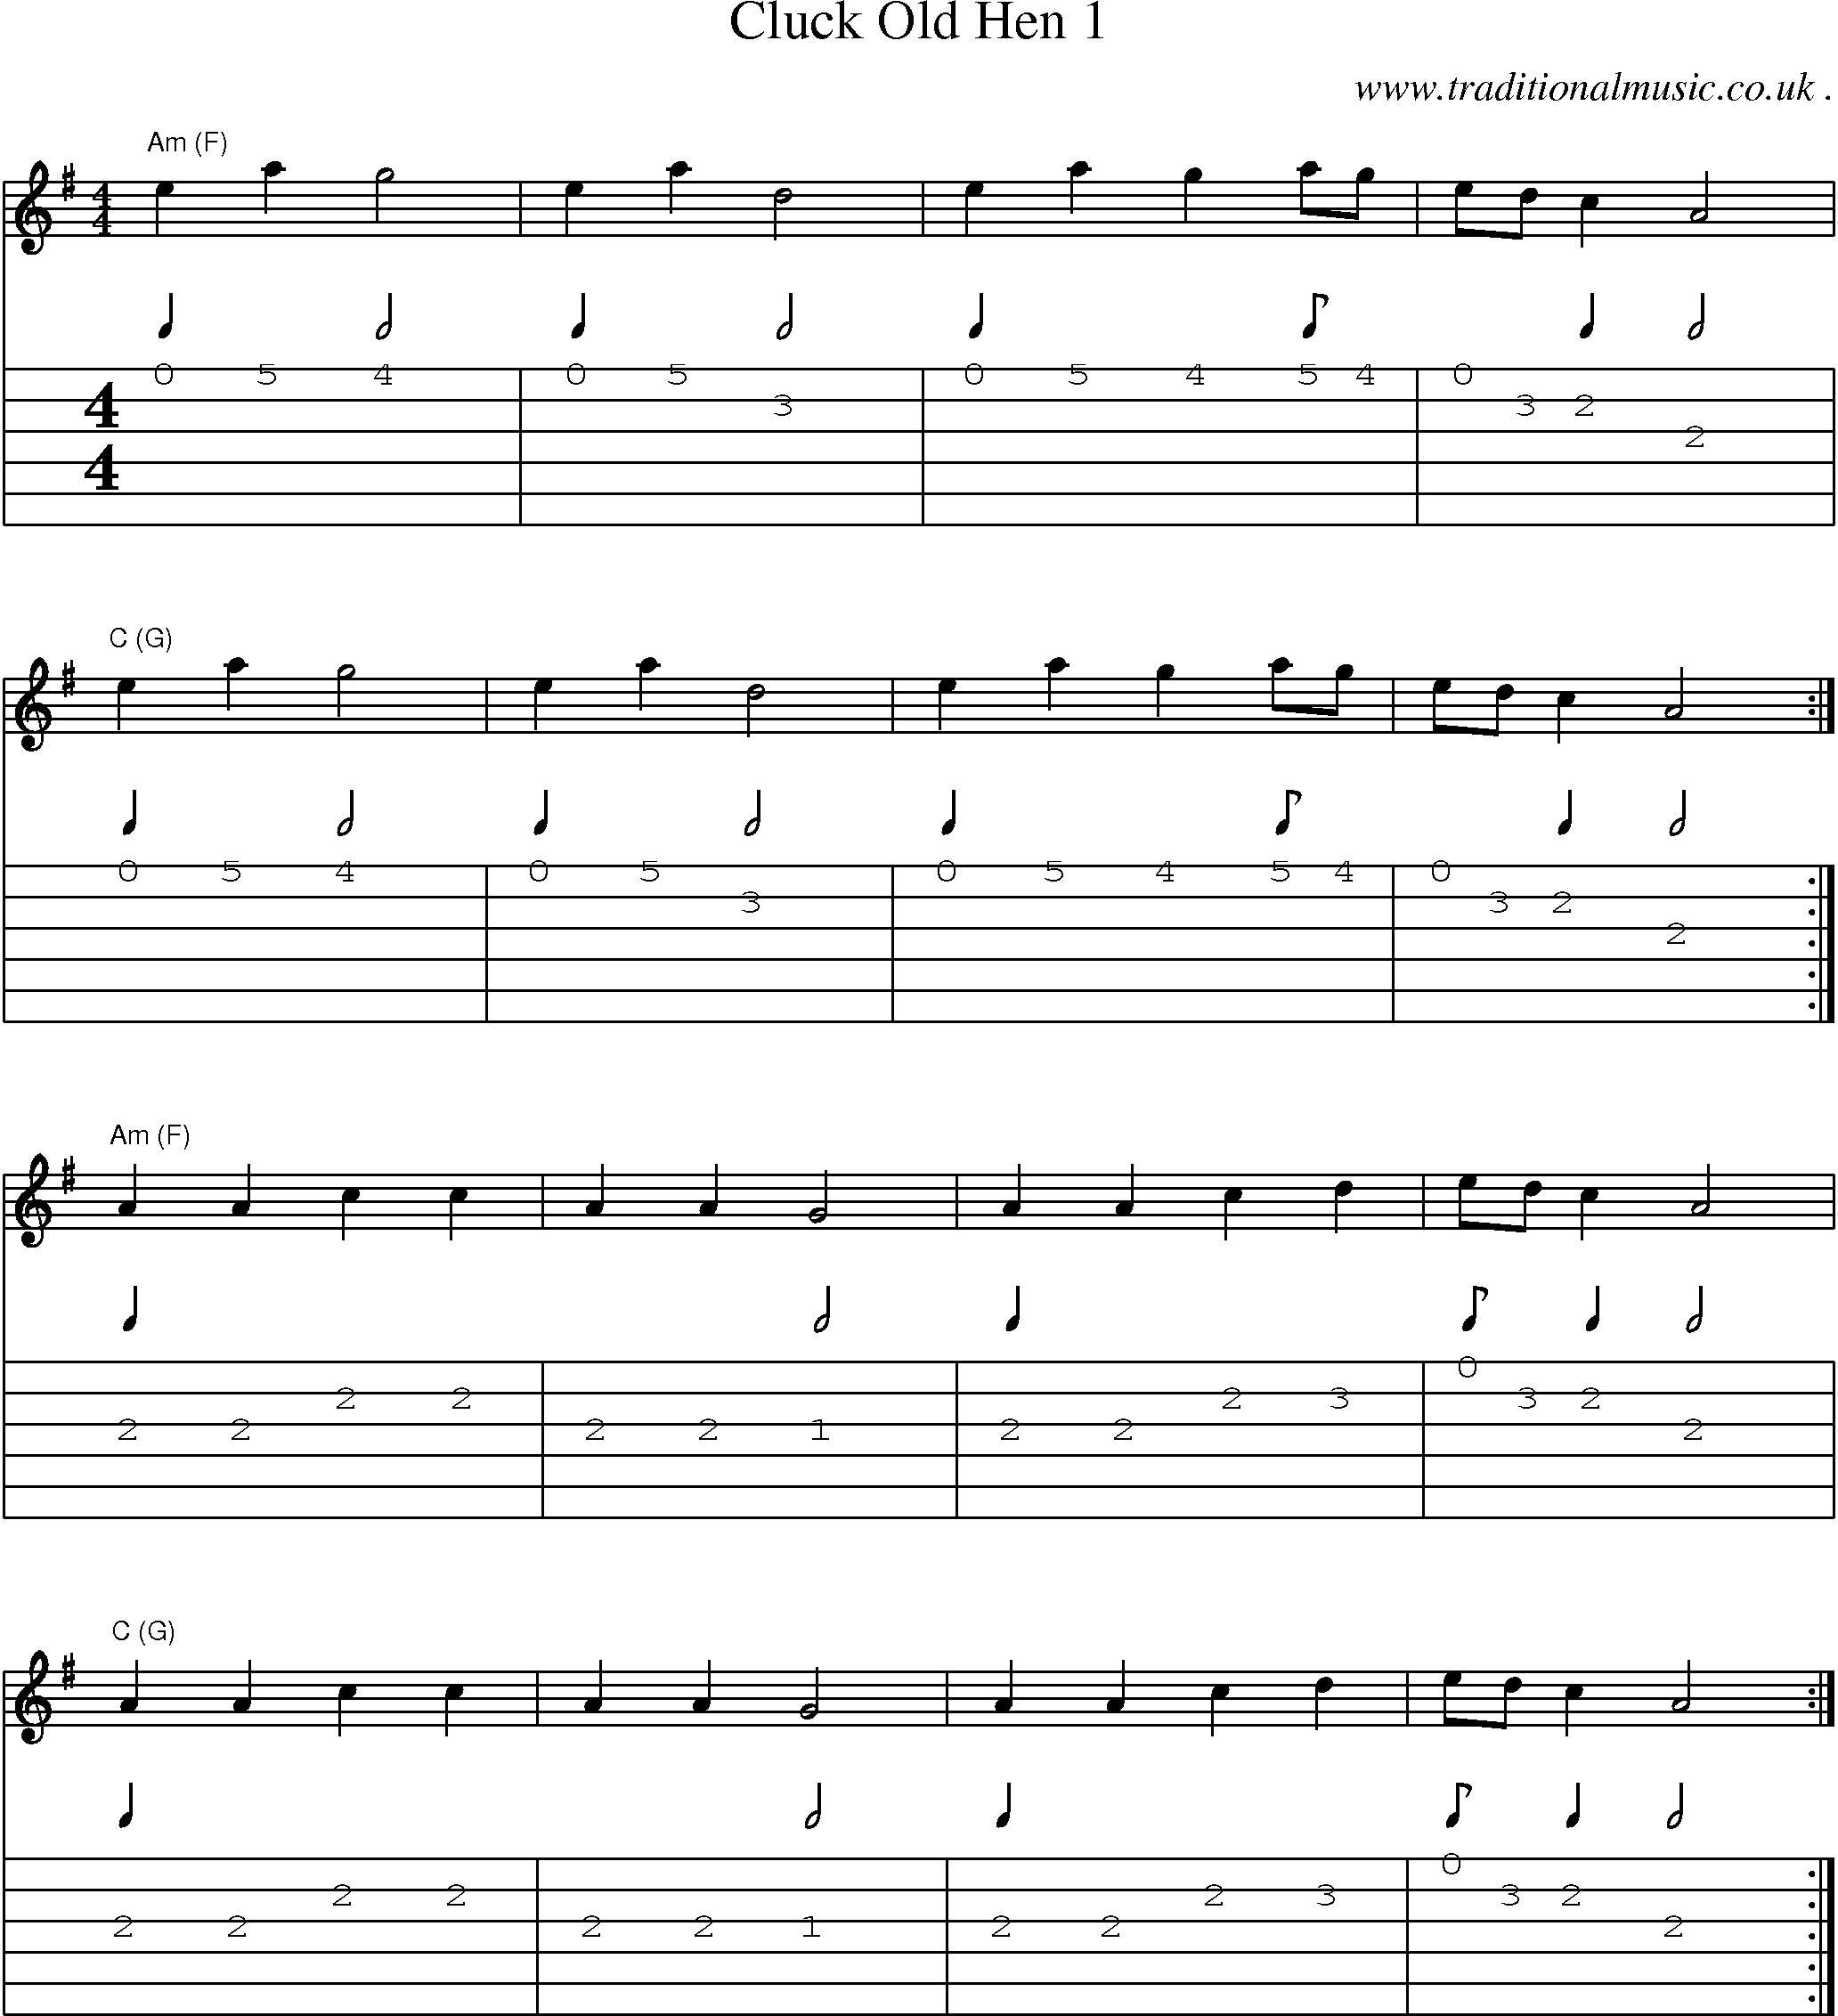 Music Score and Guitar Tabs for Cluck Old Hen 1